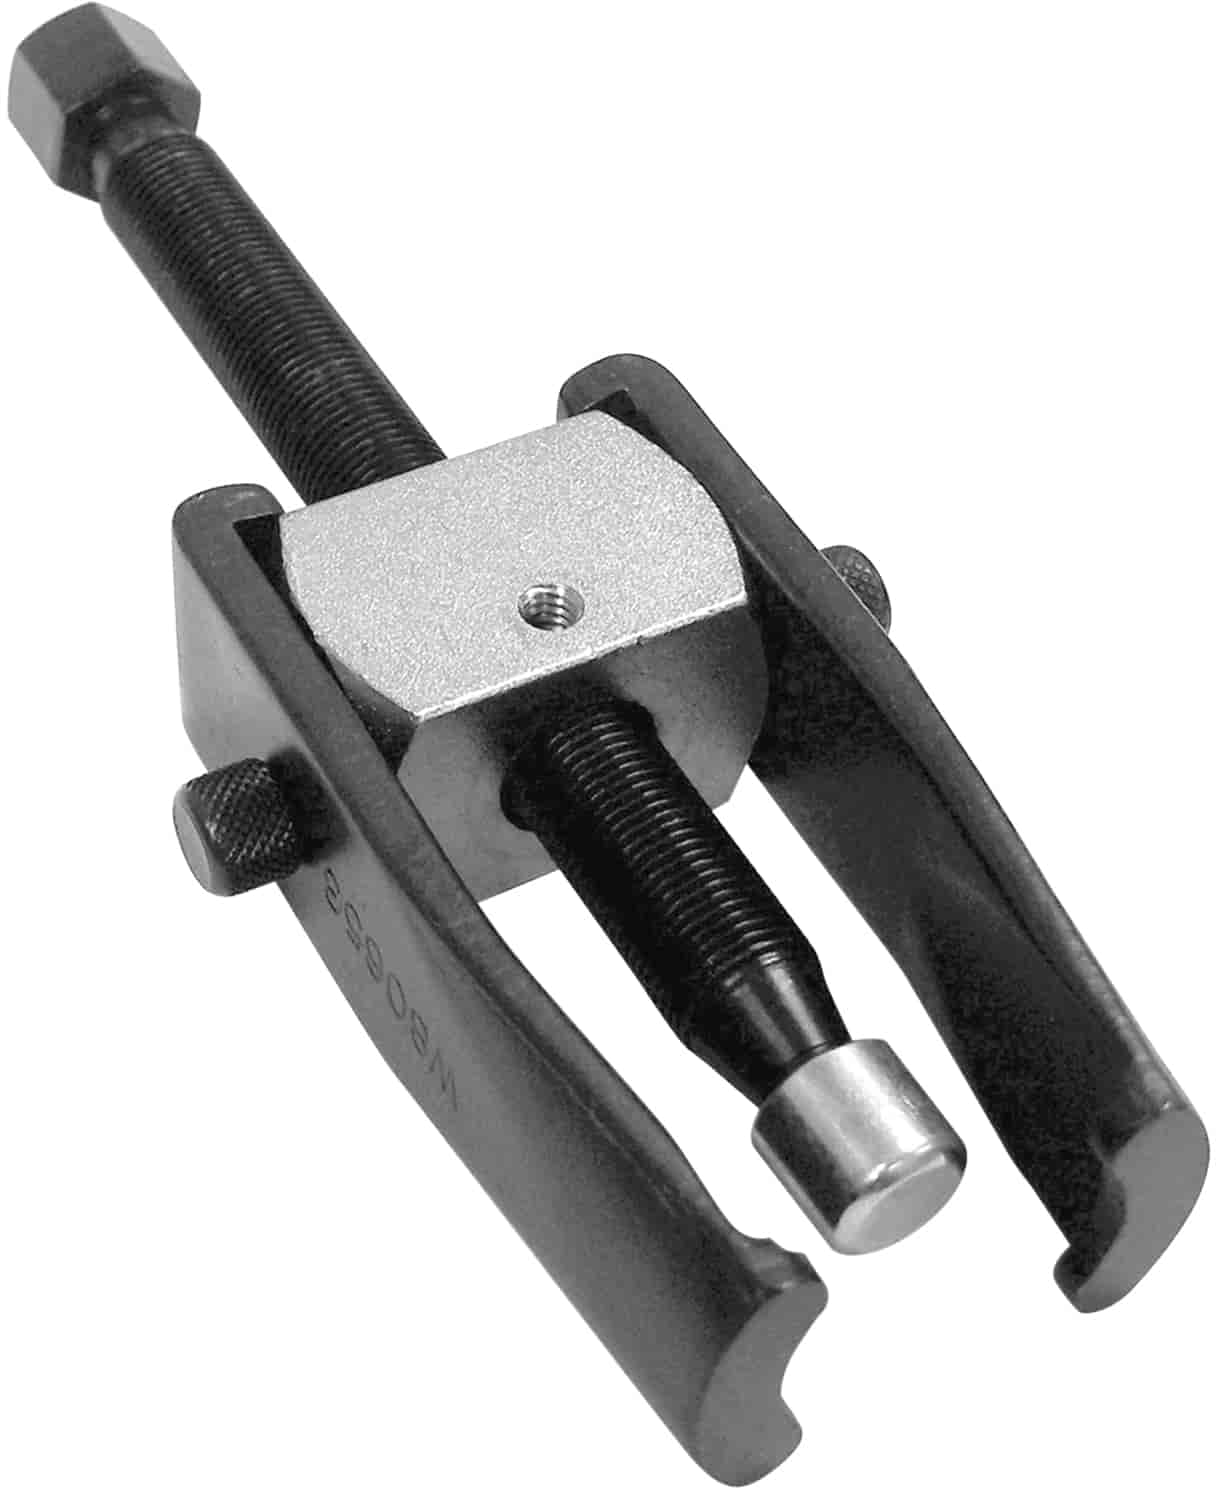 Pulley Puller